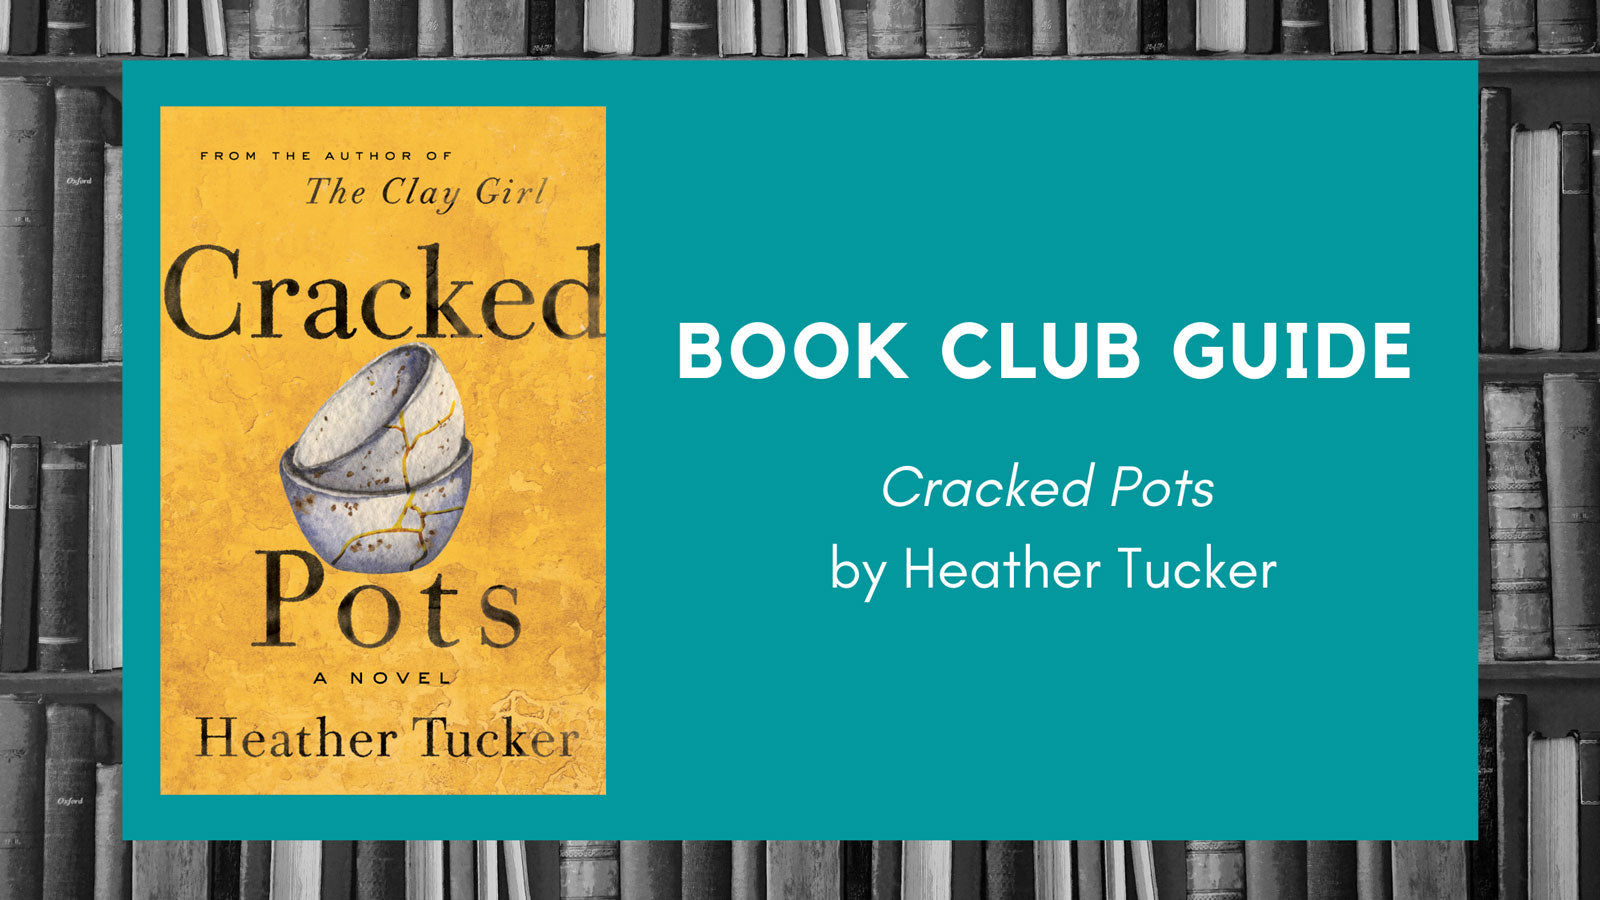 Book Club Guide: Cracked Pots by Heather Tucker